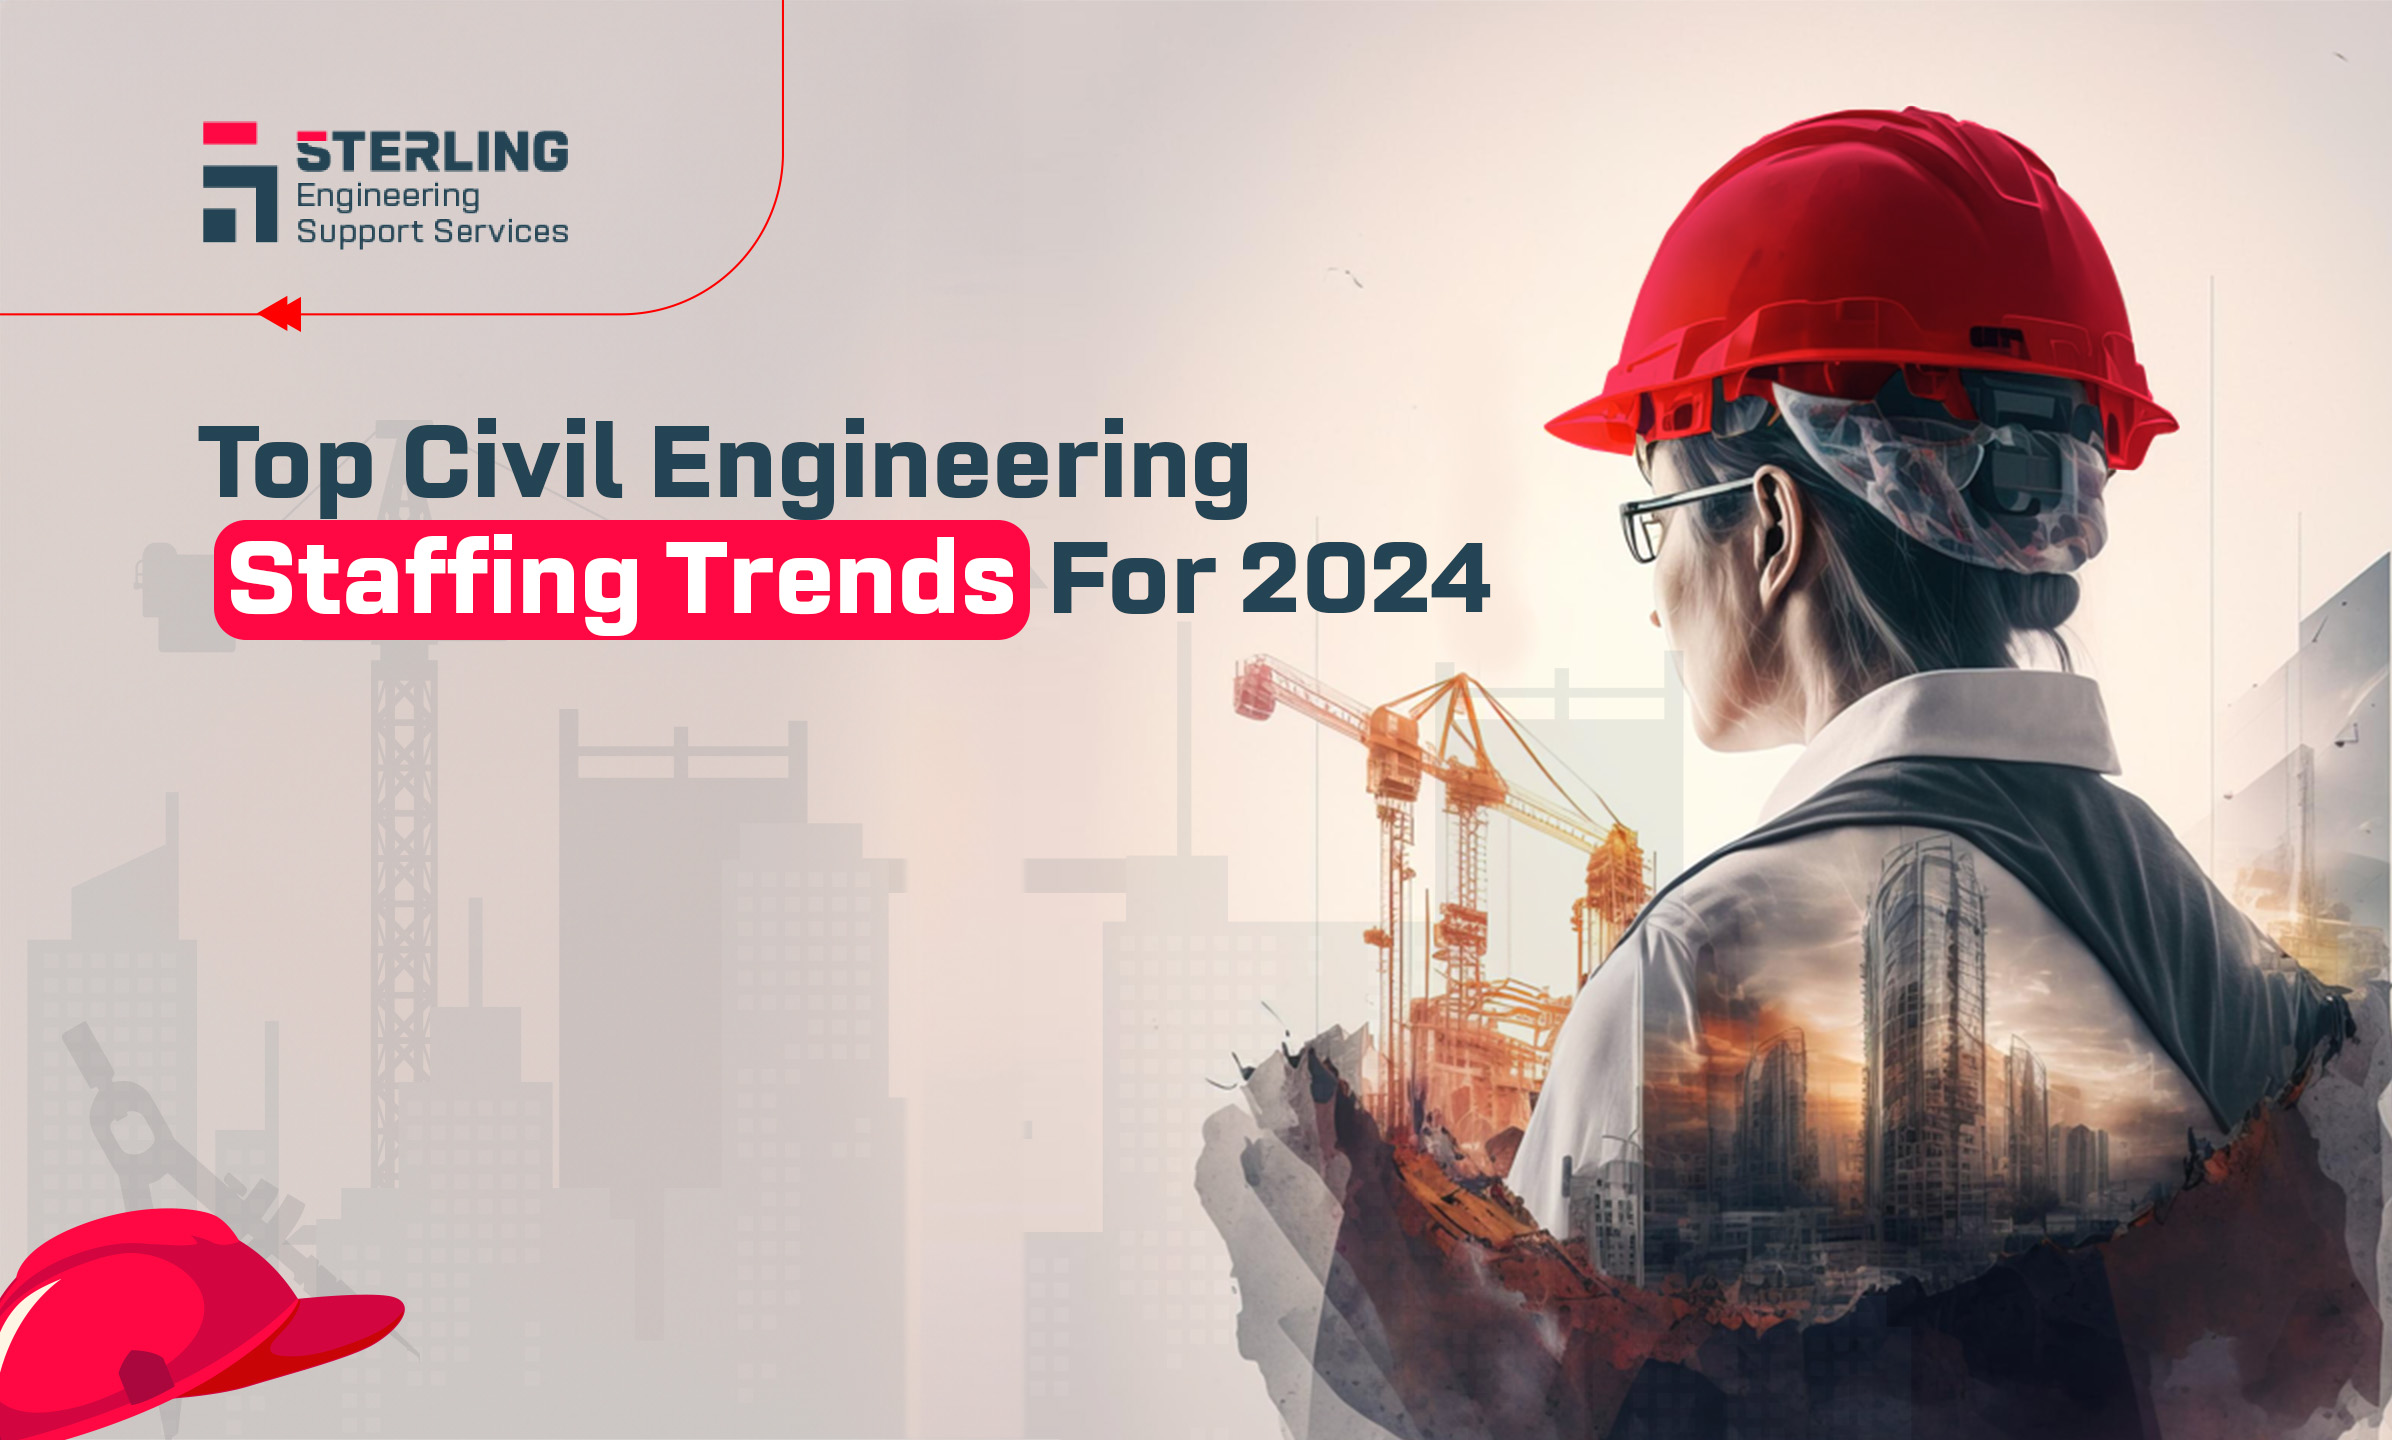 Top 8 Civil Engineering Staffing Trends To Prepare For in 2024